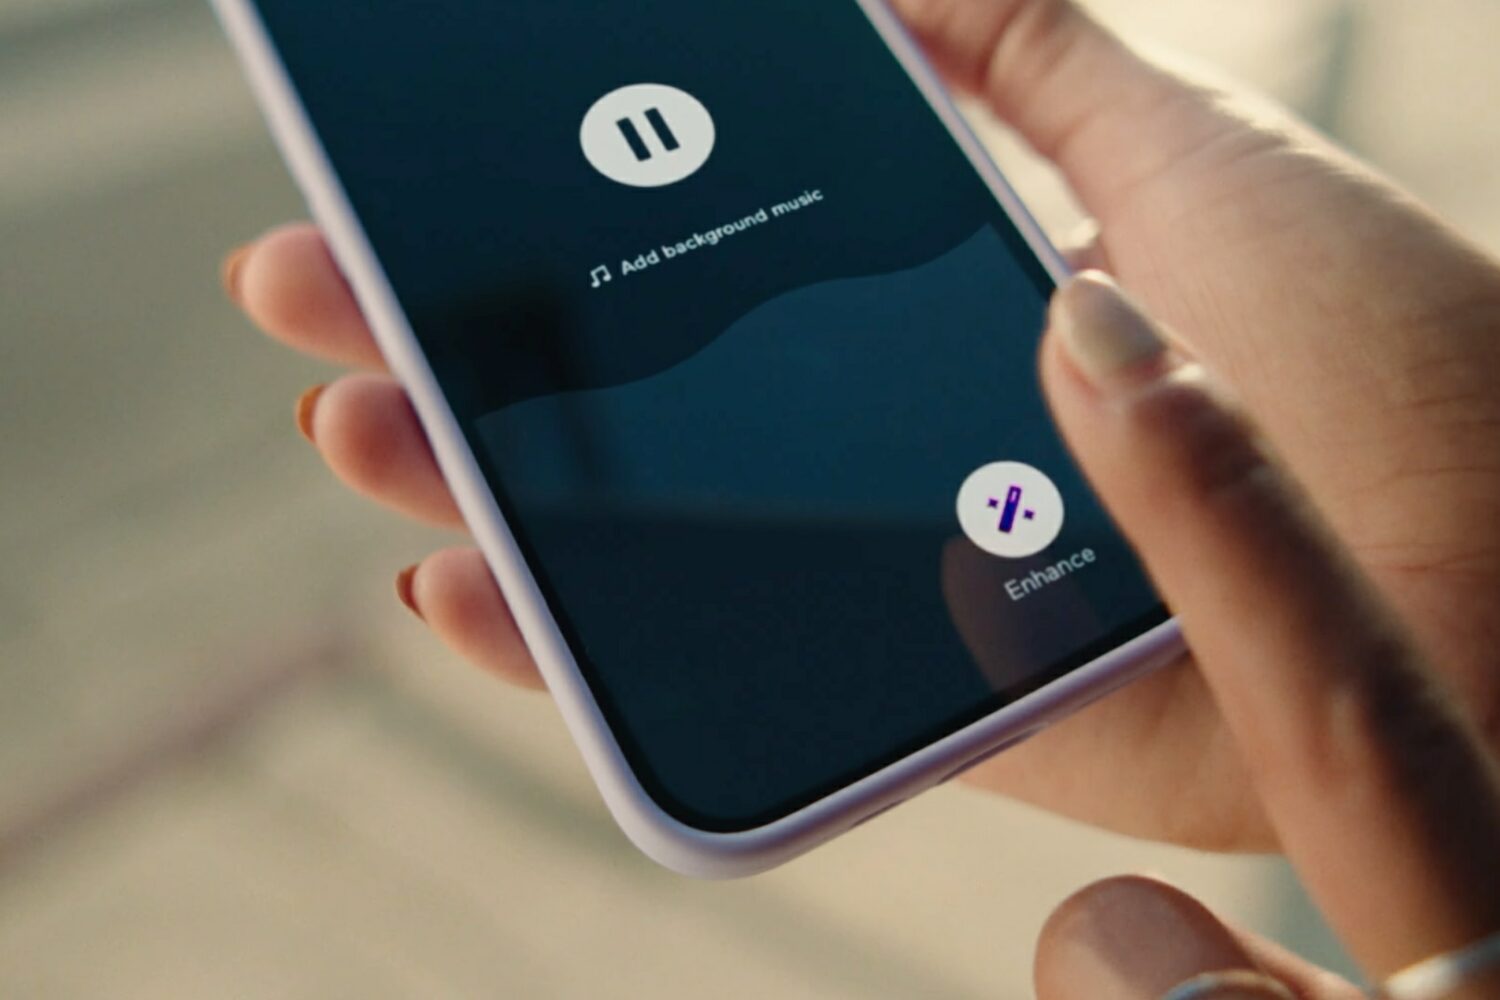 A closeup showing a woman holding an iPhone in her hand while touching the Enhance button in Spotify's Anchor app